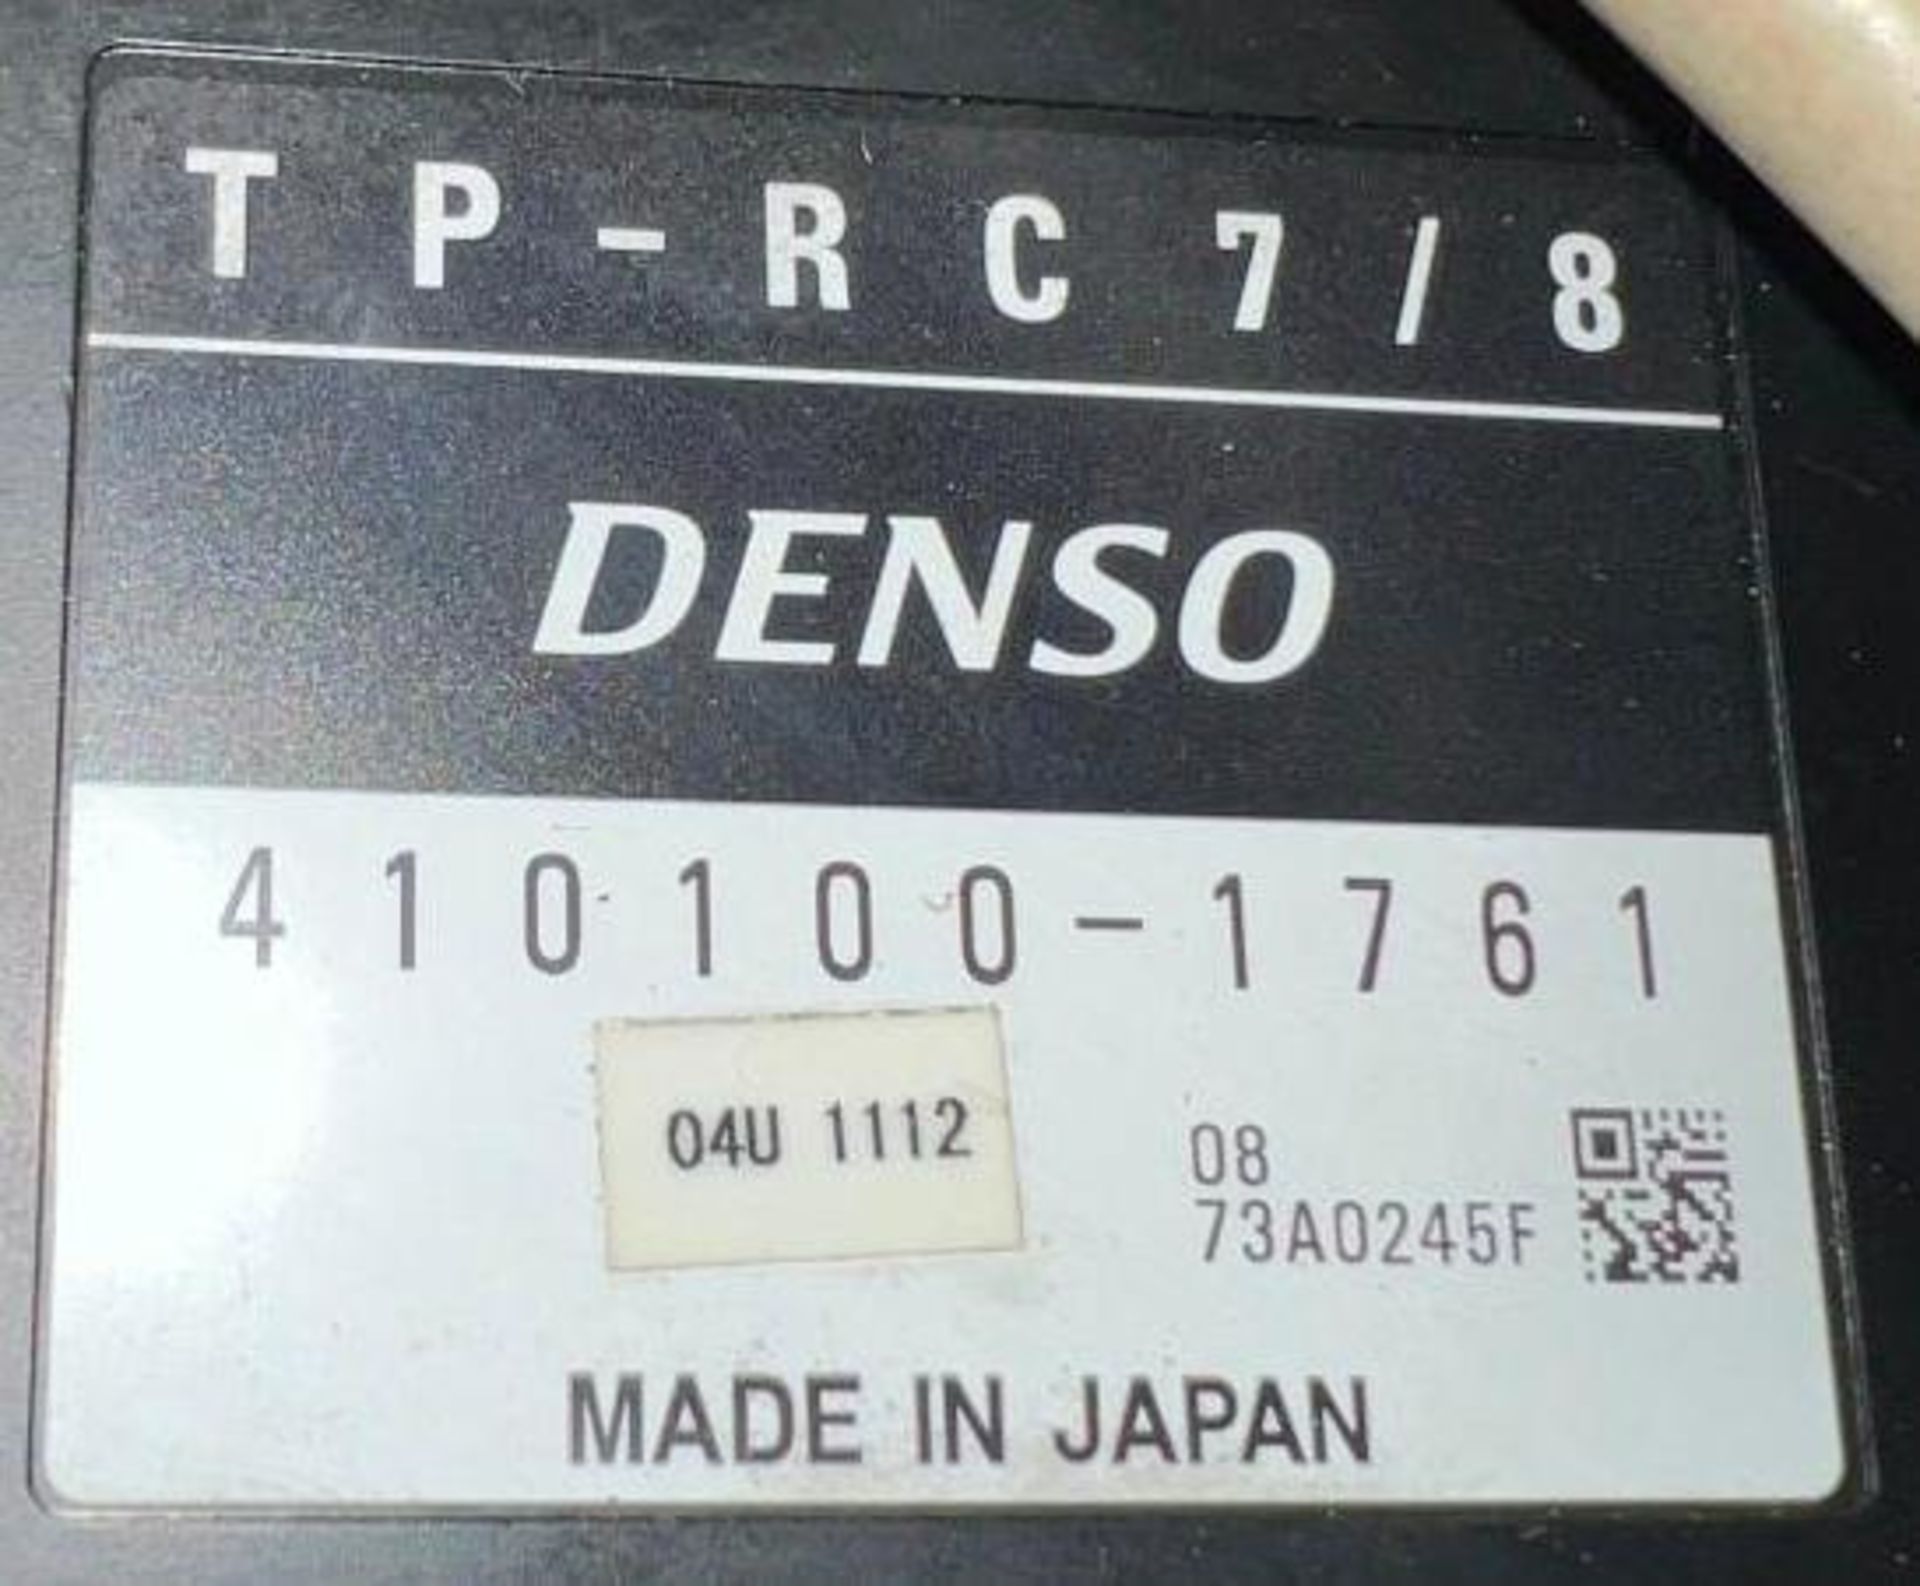 Lot of (2) Denso #TP-RC7/8 / #410100-1761 Robot Pendants - Image 3 of 4